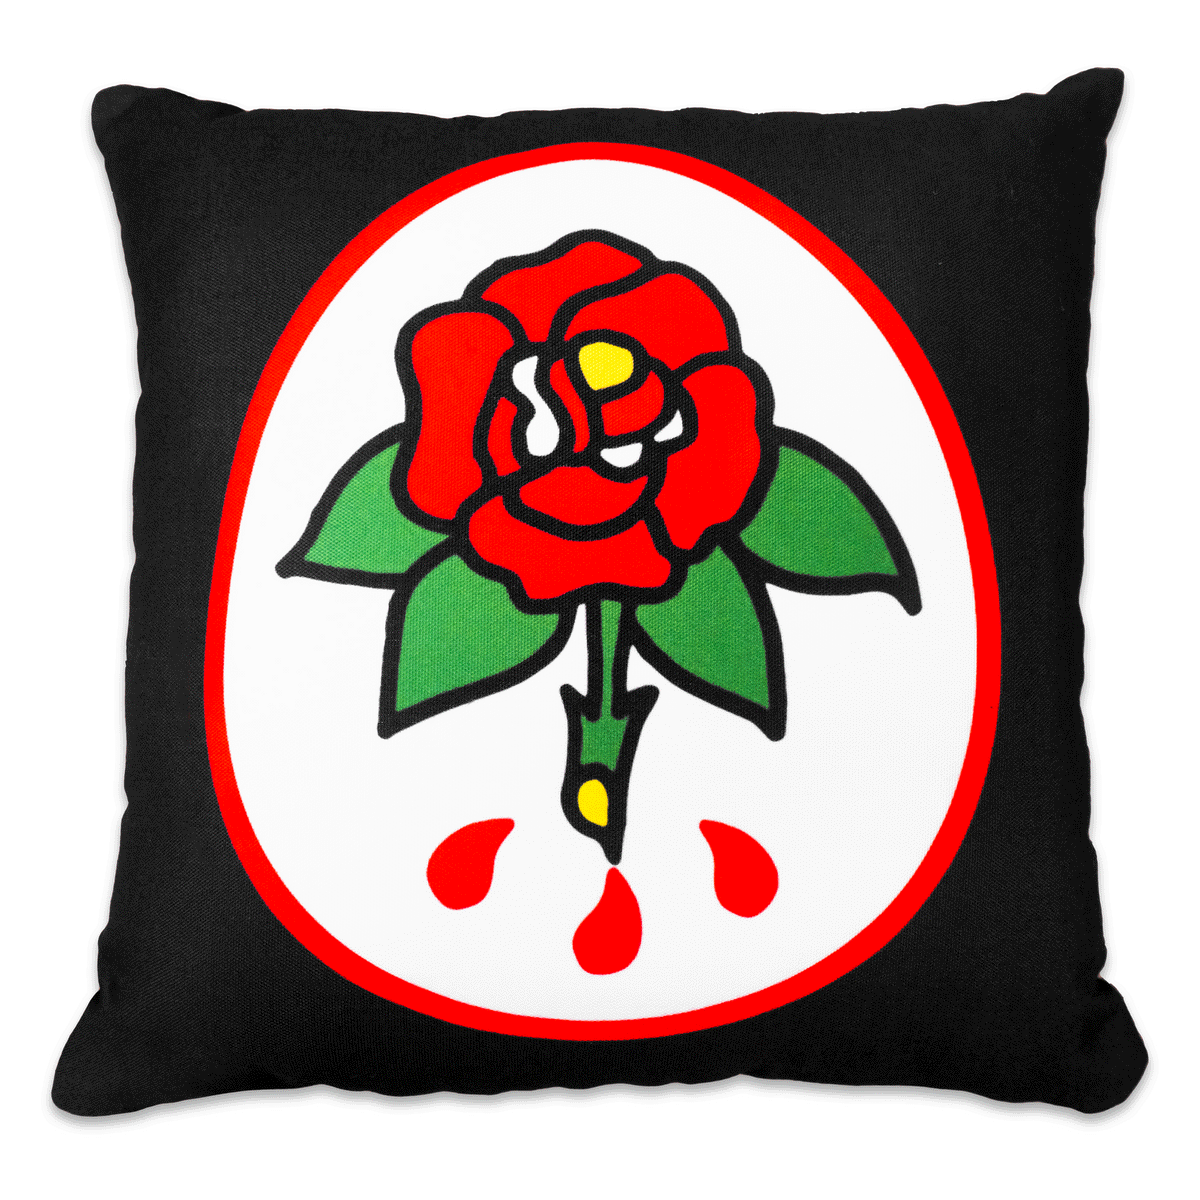 Animation showing both sides of the "Sword & Rose" pillow by No Fun®